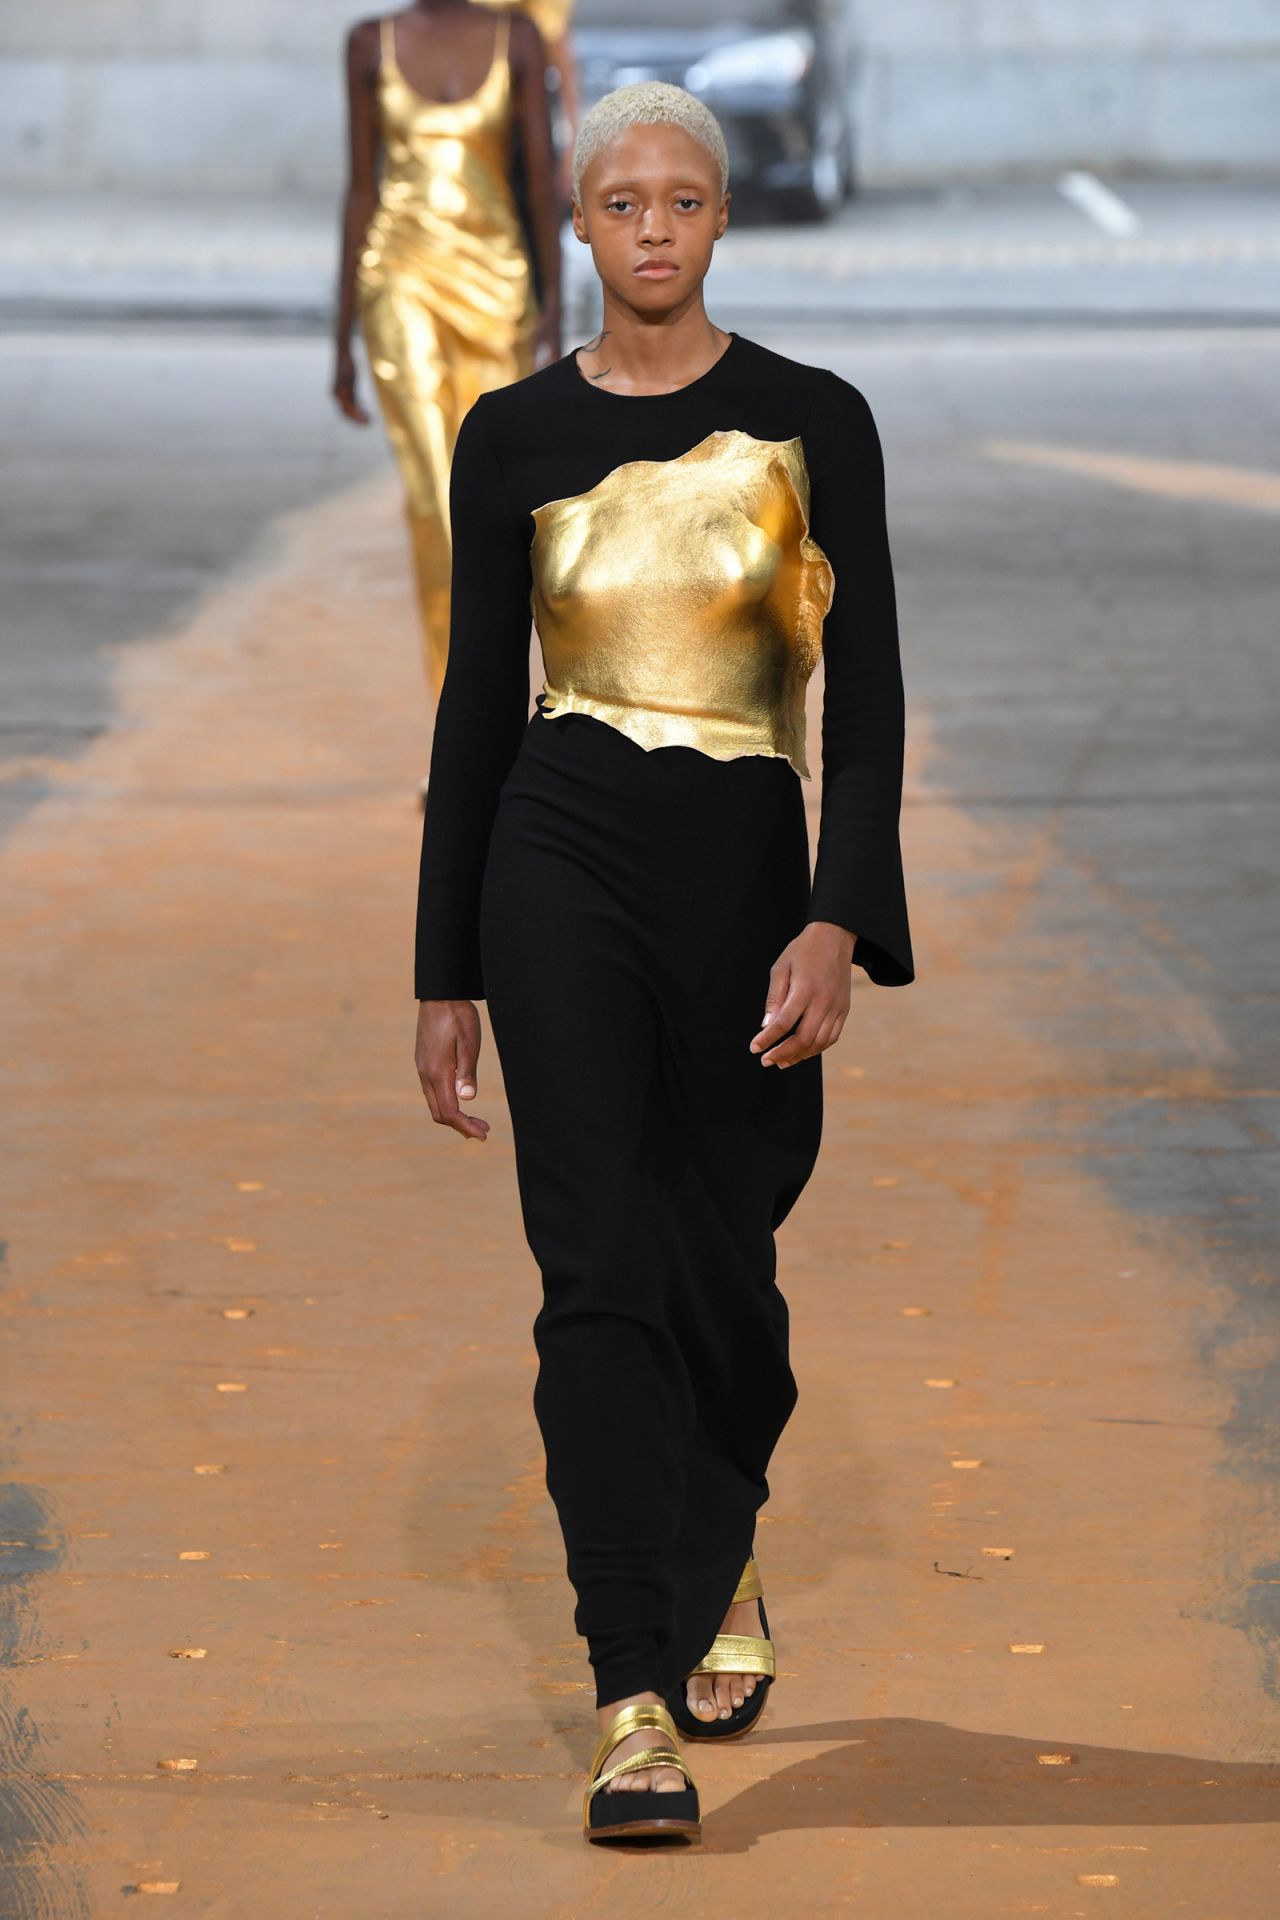 Gold was a focus of Gabriela Hearst's Sappho-inspired collection, in fabrics, accents and detailing. True to her sustainability efforts, Hearst said: "All of our materials are soundly investigated... there's not one material in this collection that I didn't approve or know the composition of."